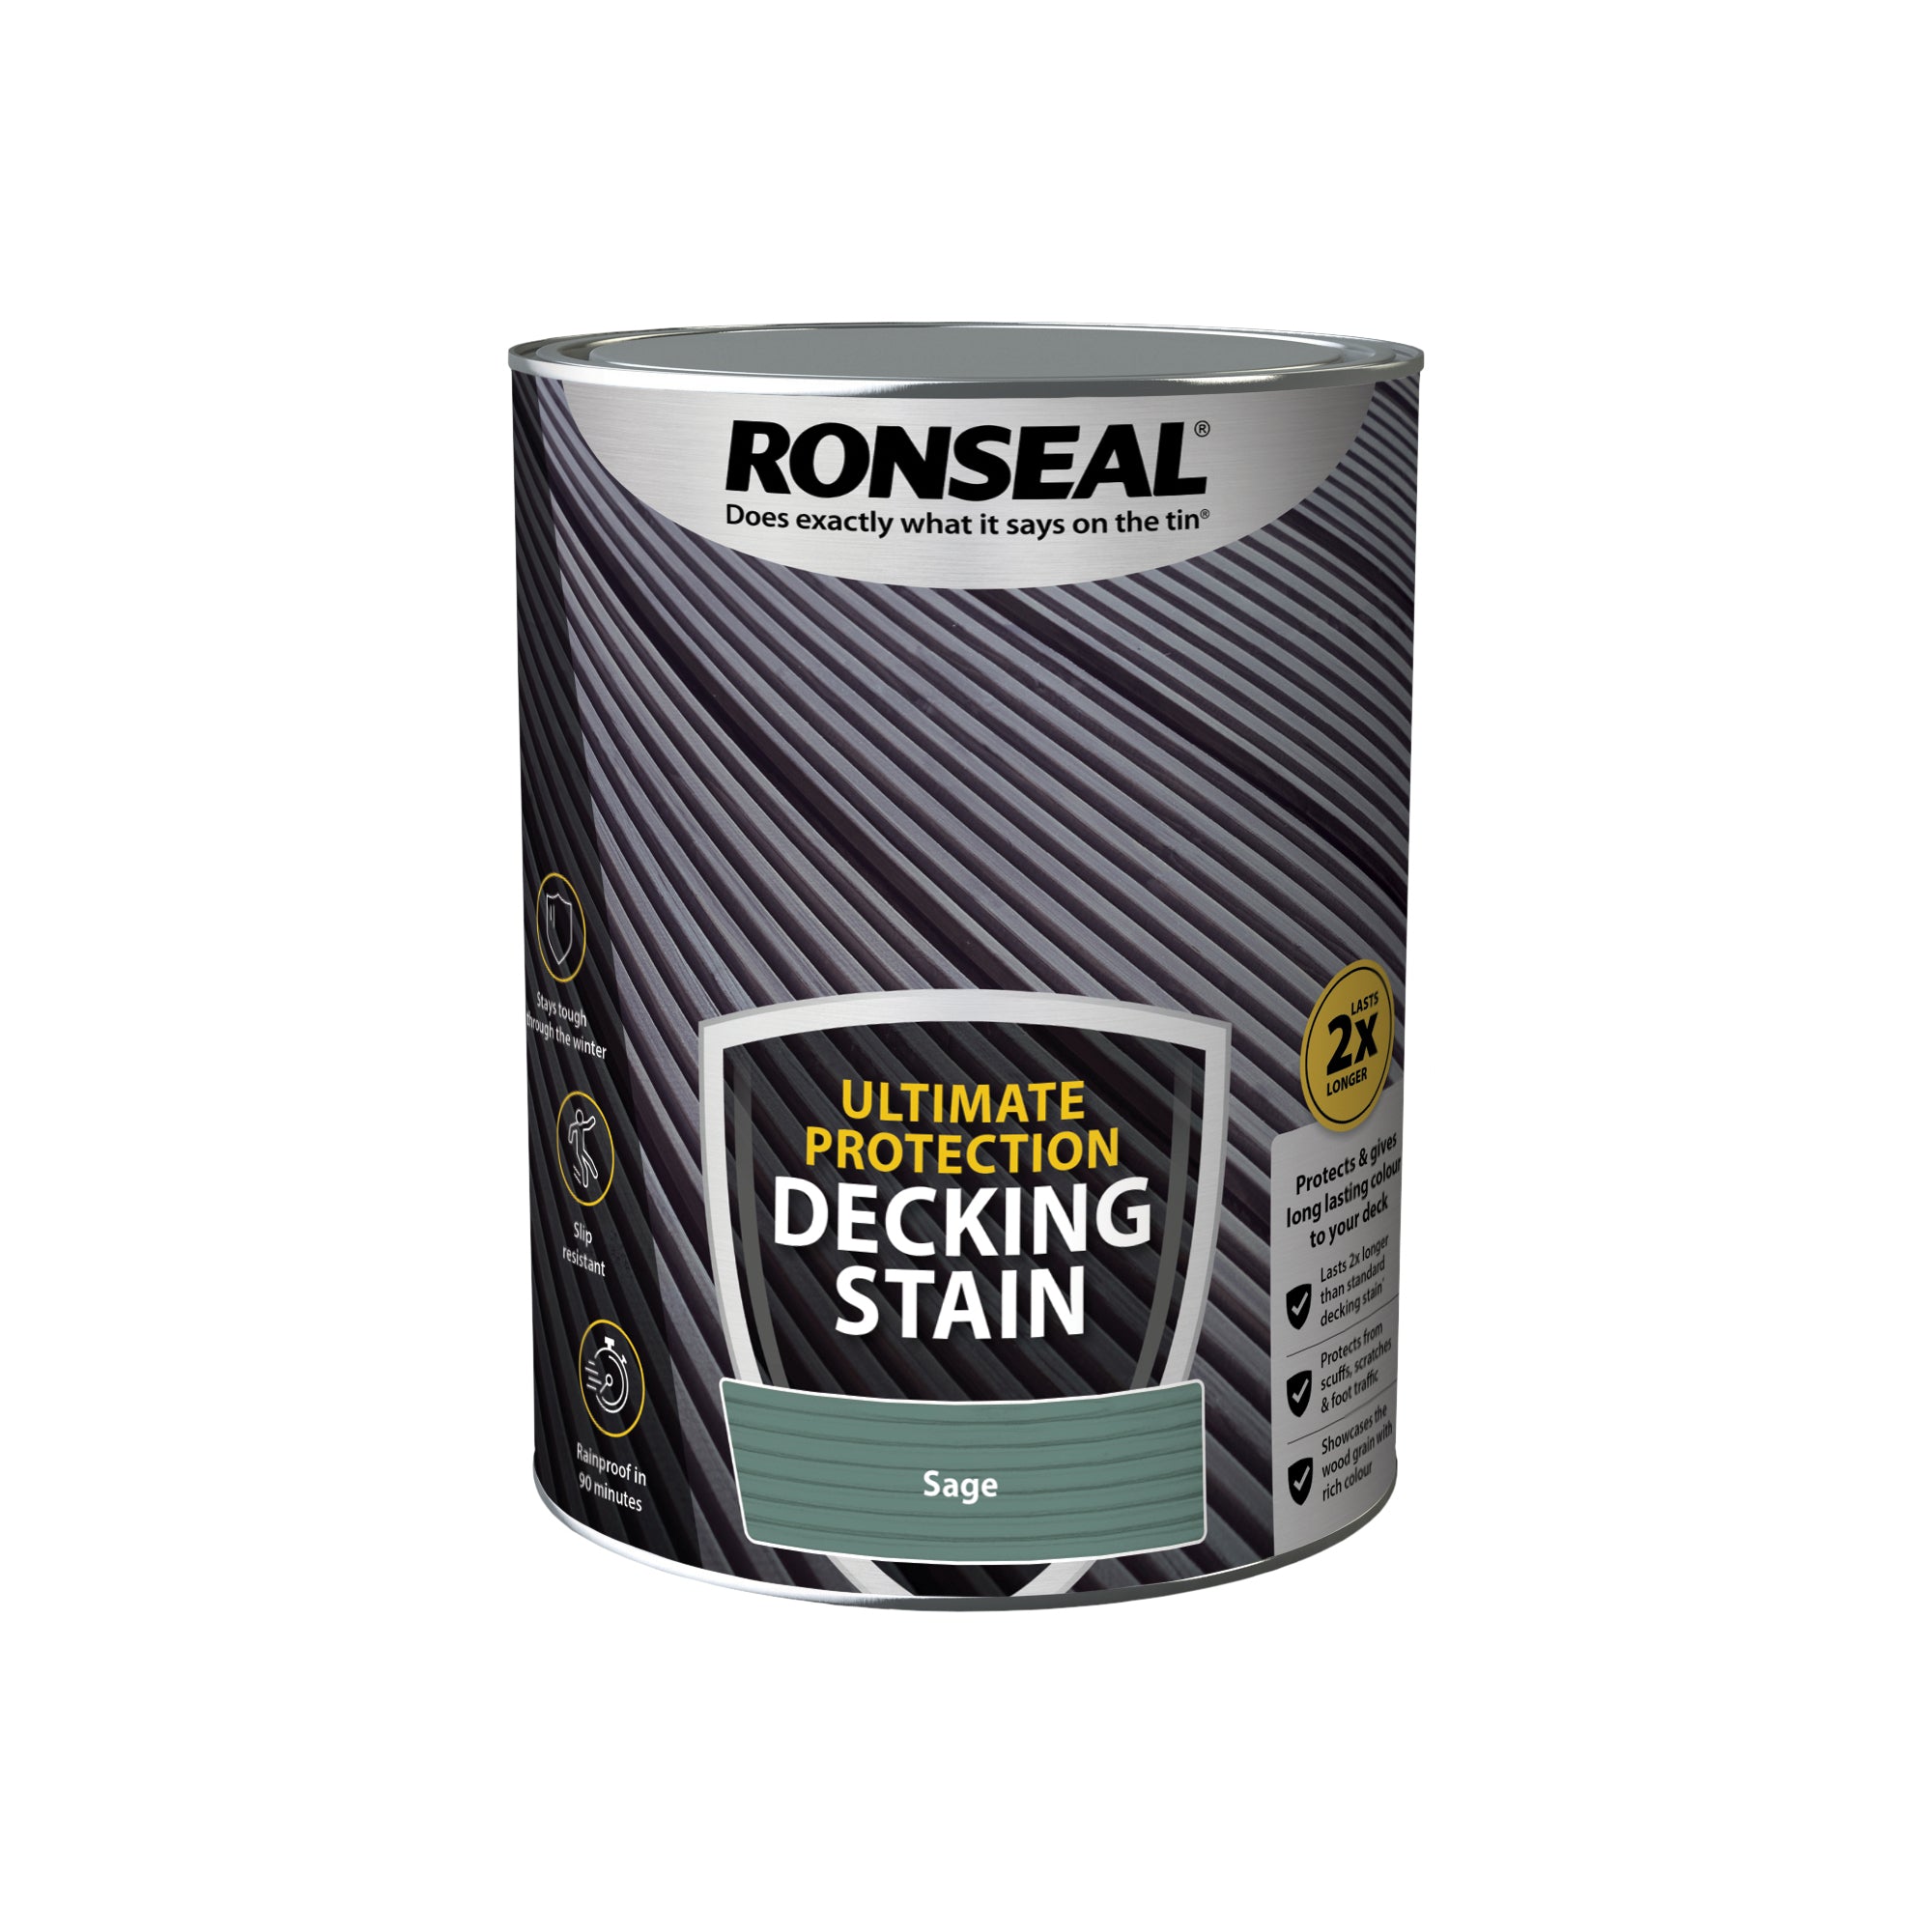 Ronseal-Ultimate-Protection-Decking-Stain-Sage-5L